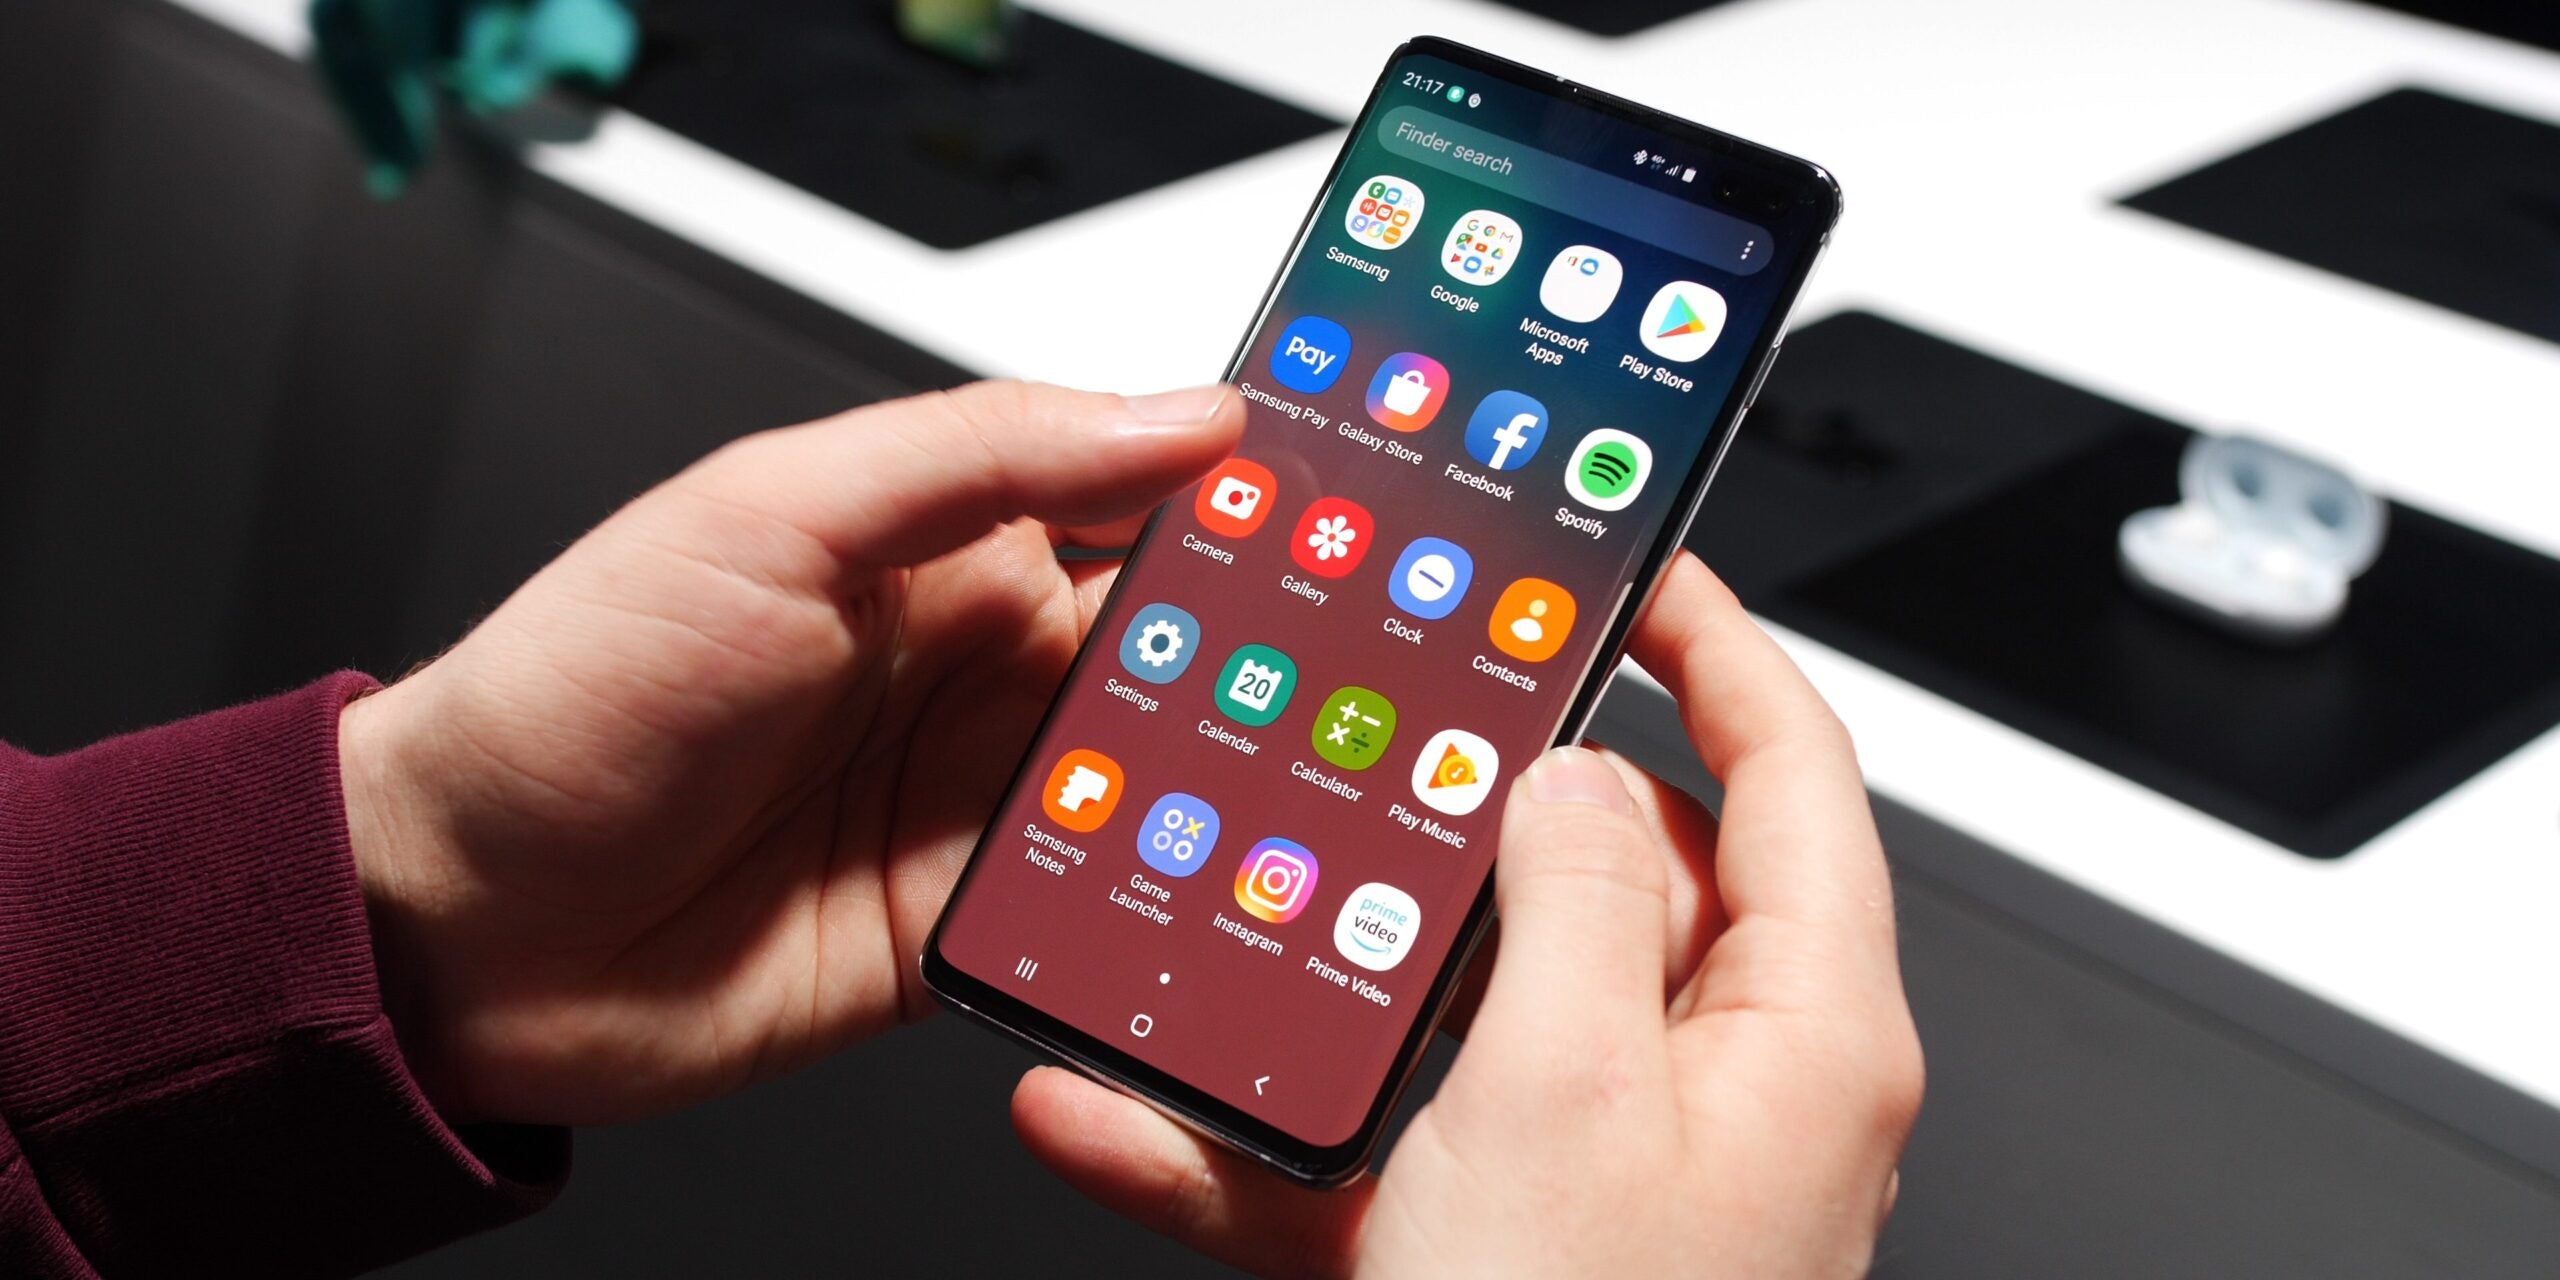 Samsung Galaxy S10 Series: One of the best to buy in 2020